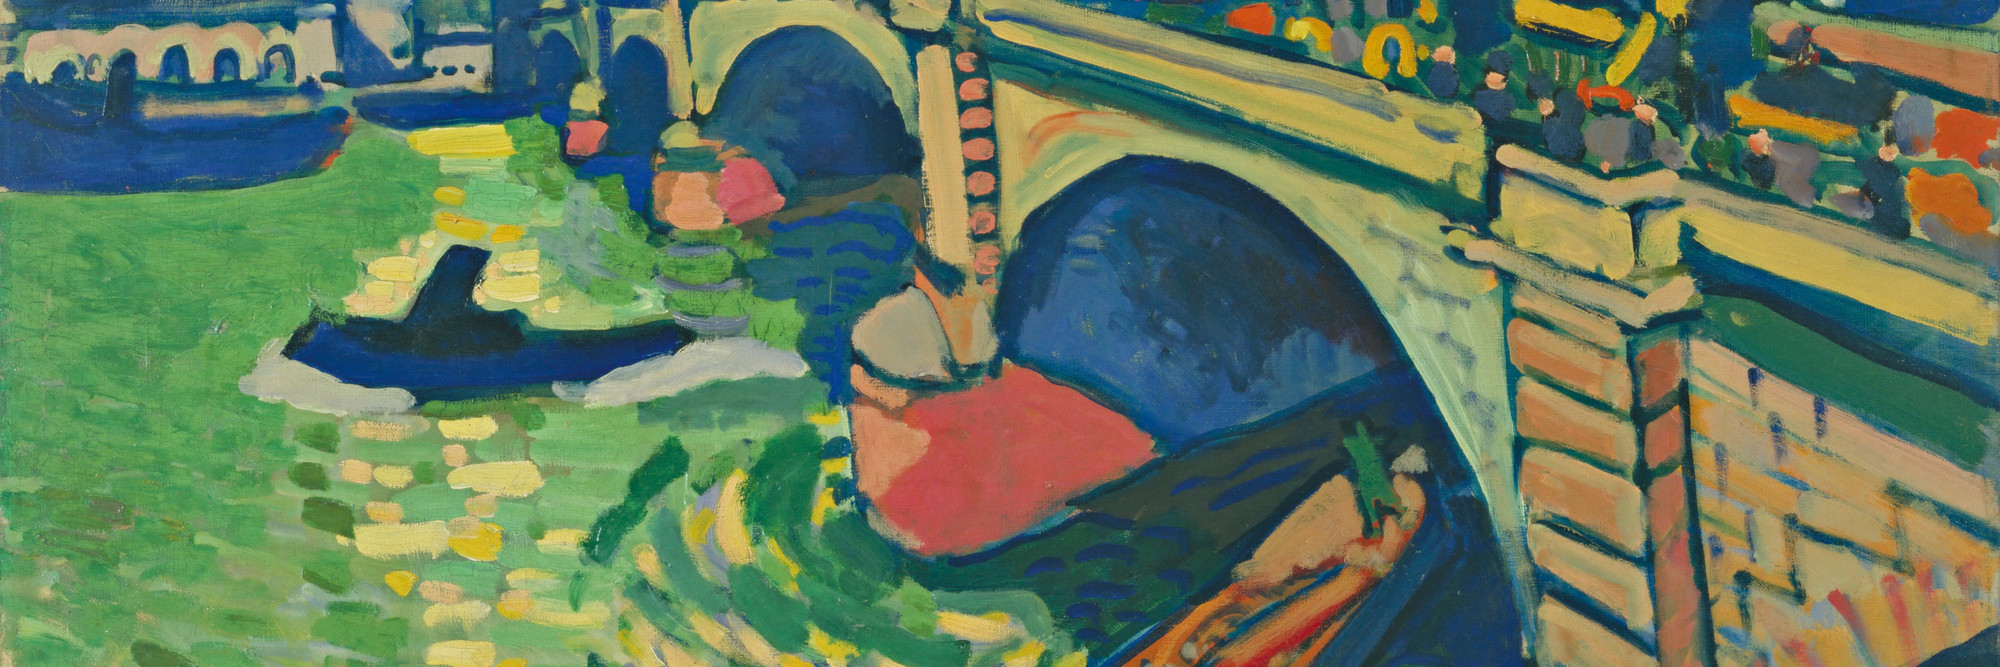 André Derain. London Bridge. London, winter 1906. Oil on canvas, 26 x 39&#34; (66 x 99.1 cm). Gift of Mr. and Mrs. Charles Zadok. © 2023 Artists Rights Society (ARS), New York / ADAGP, Paris